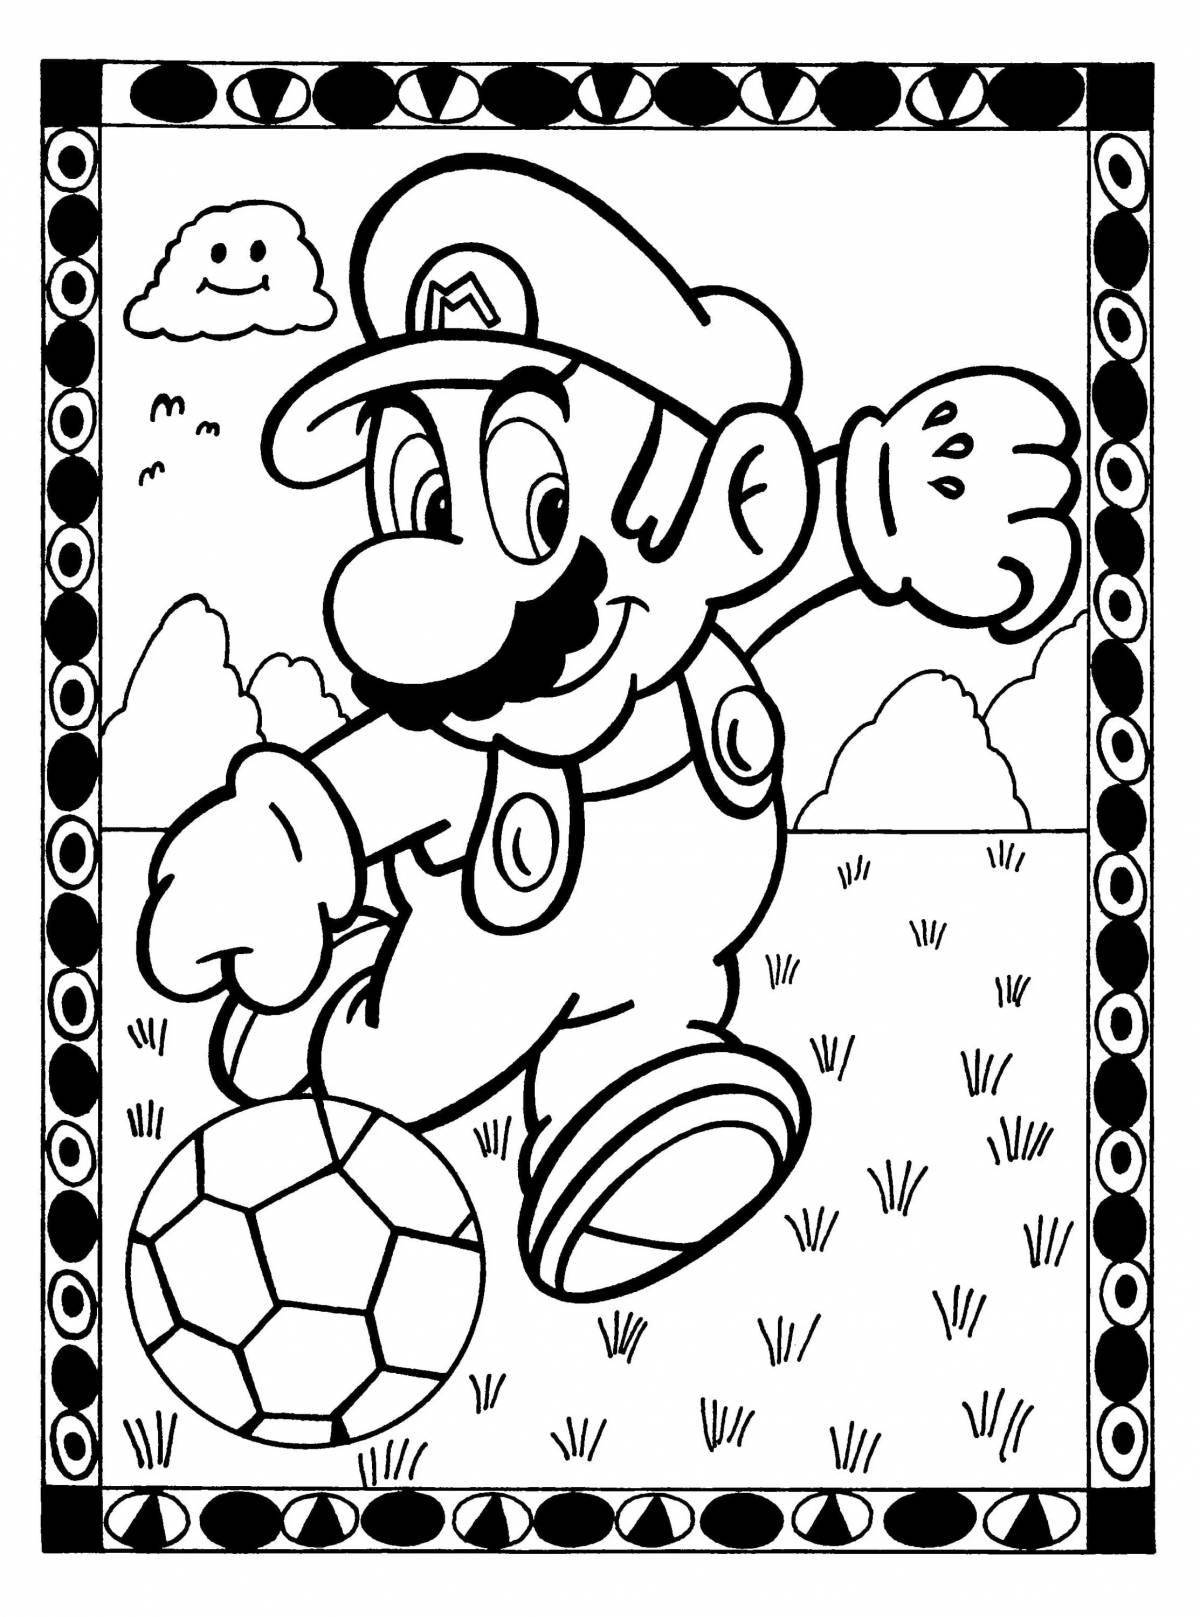 Great mario coloring game